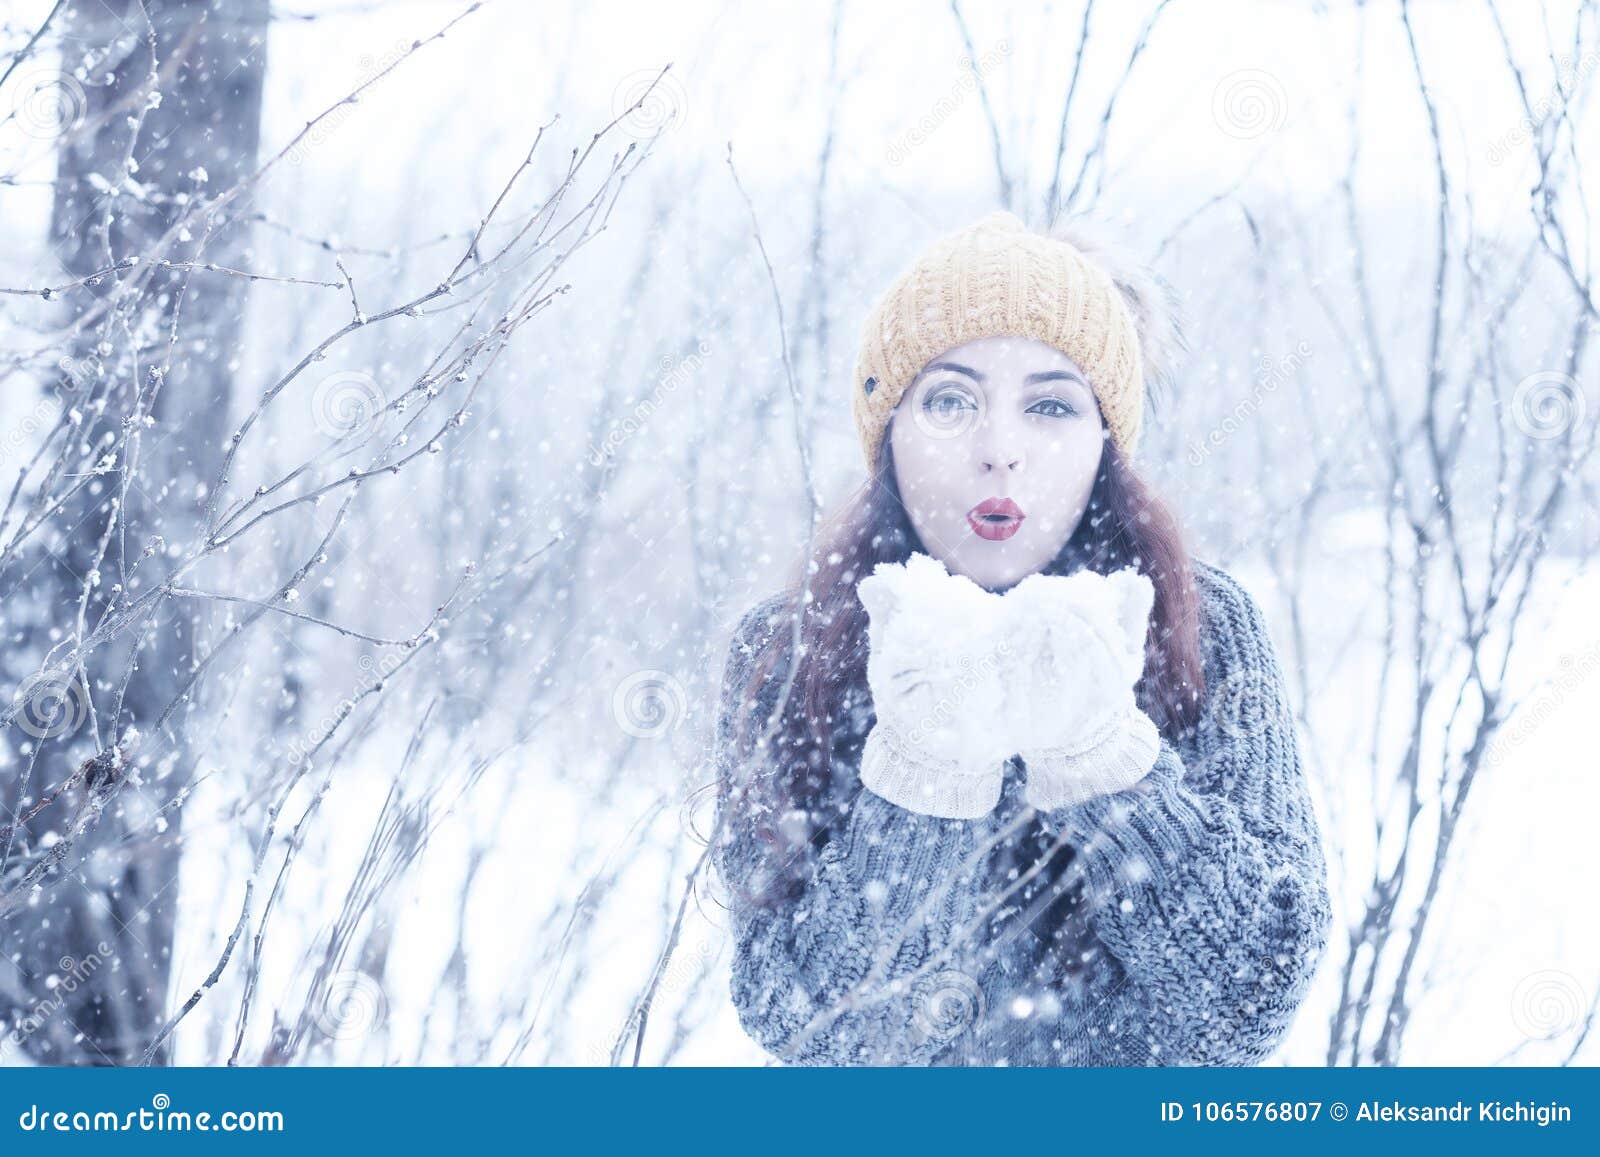 Beautiful Girl in a Beautiful Winter Snow Stock Image - Image of female ...